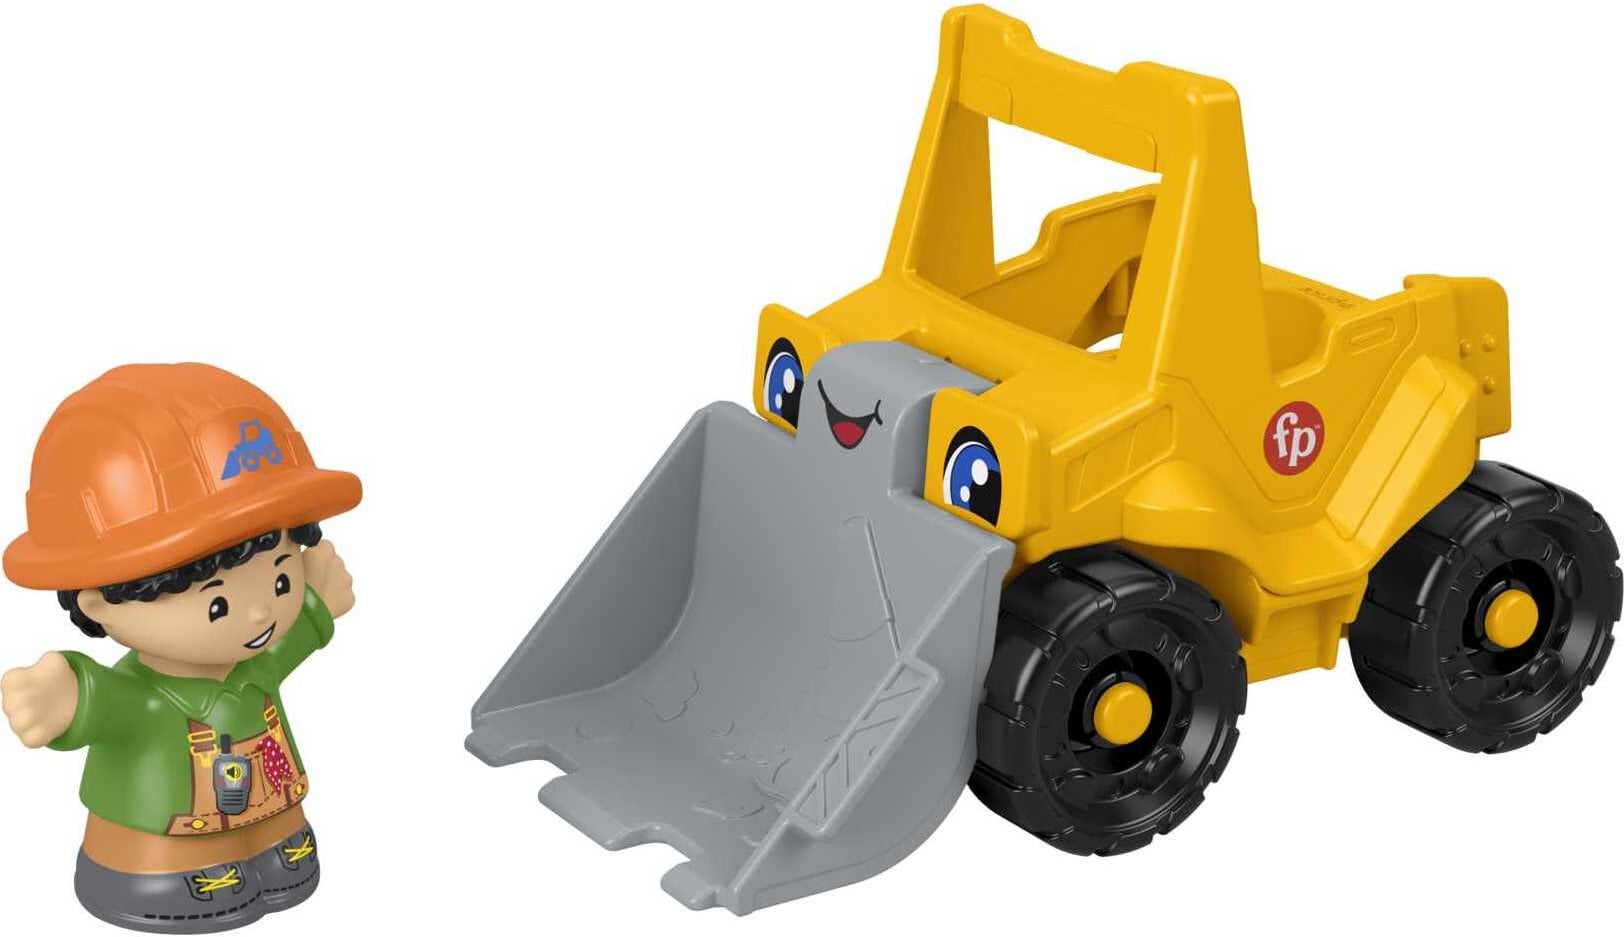 Fisher Price Little People Vehicle construction Yellow Dump Truck grey bin toy 